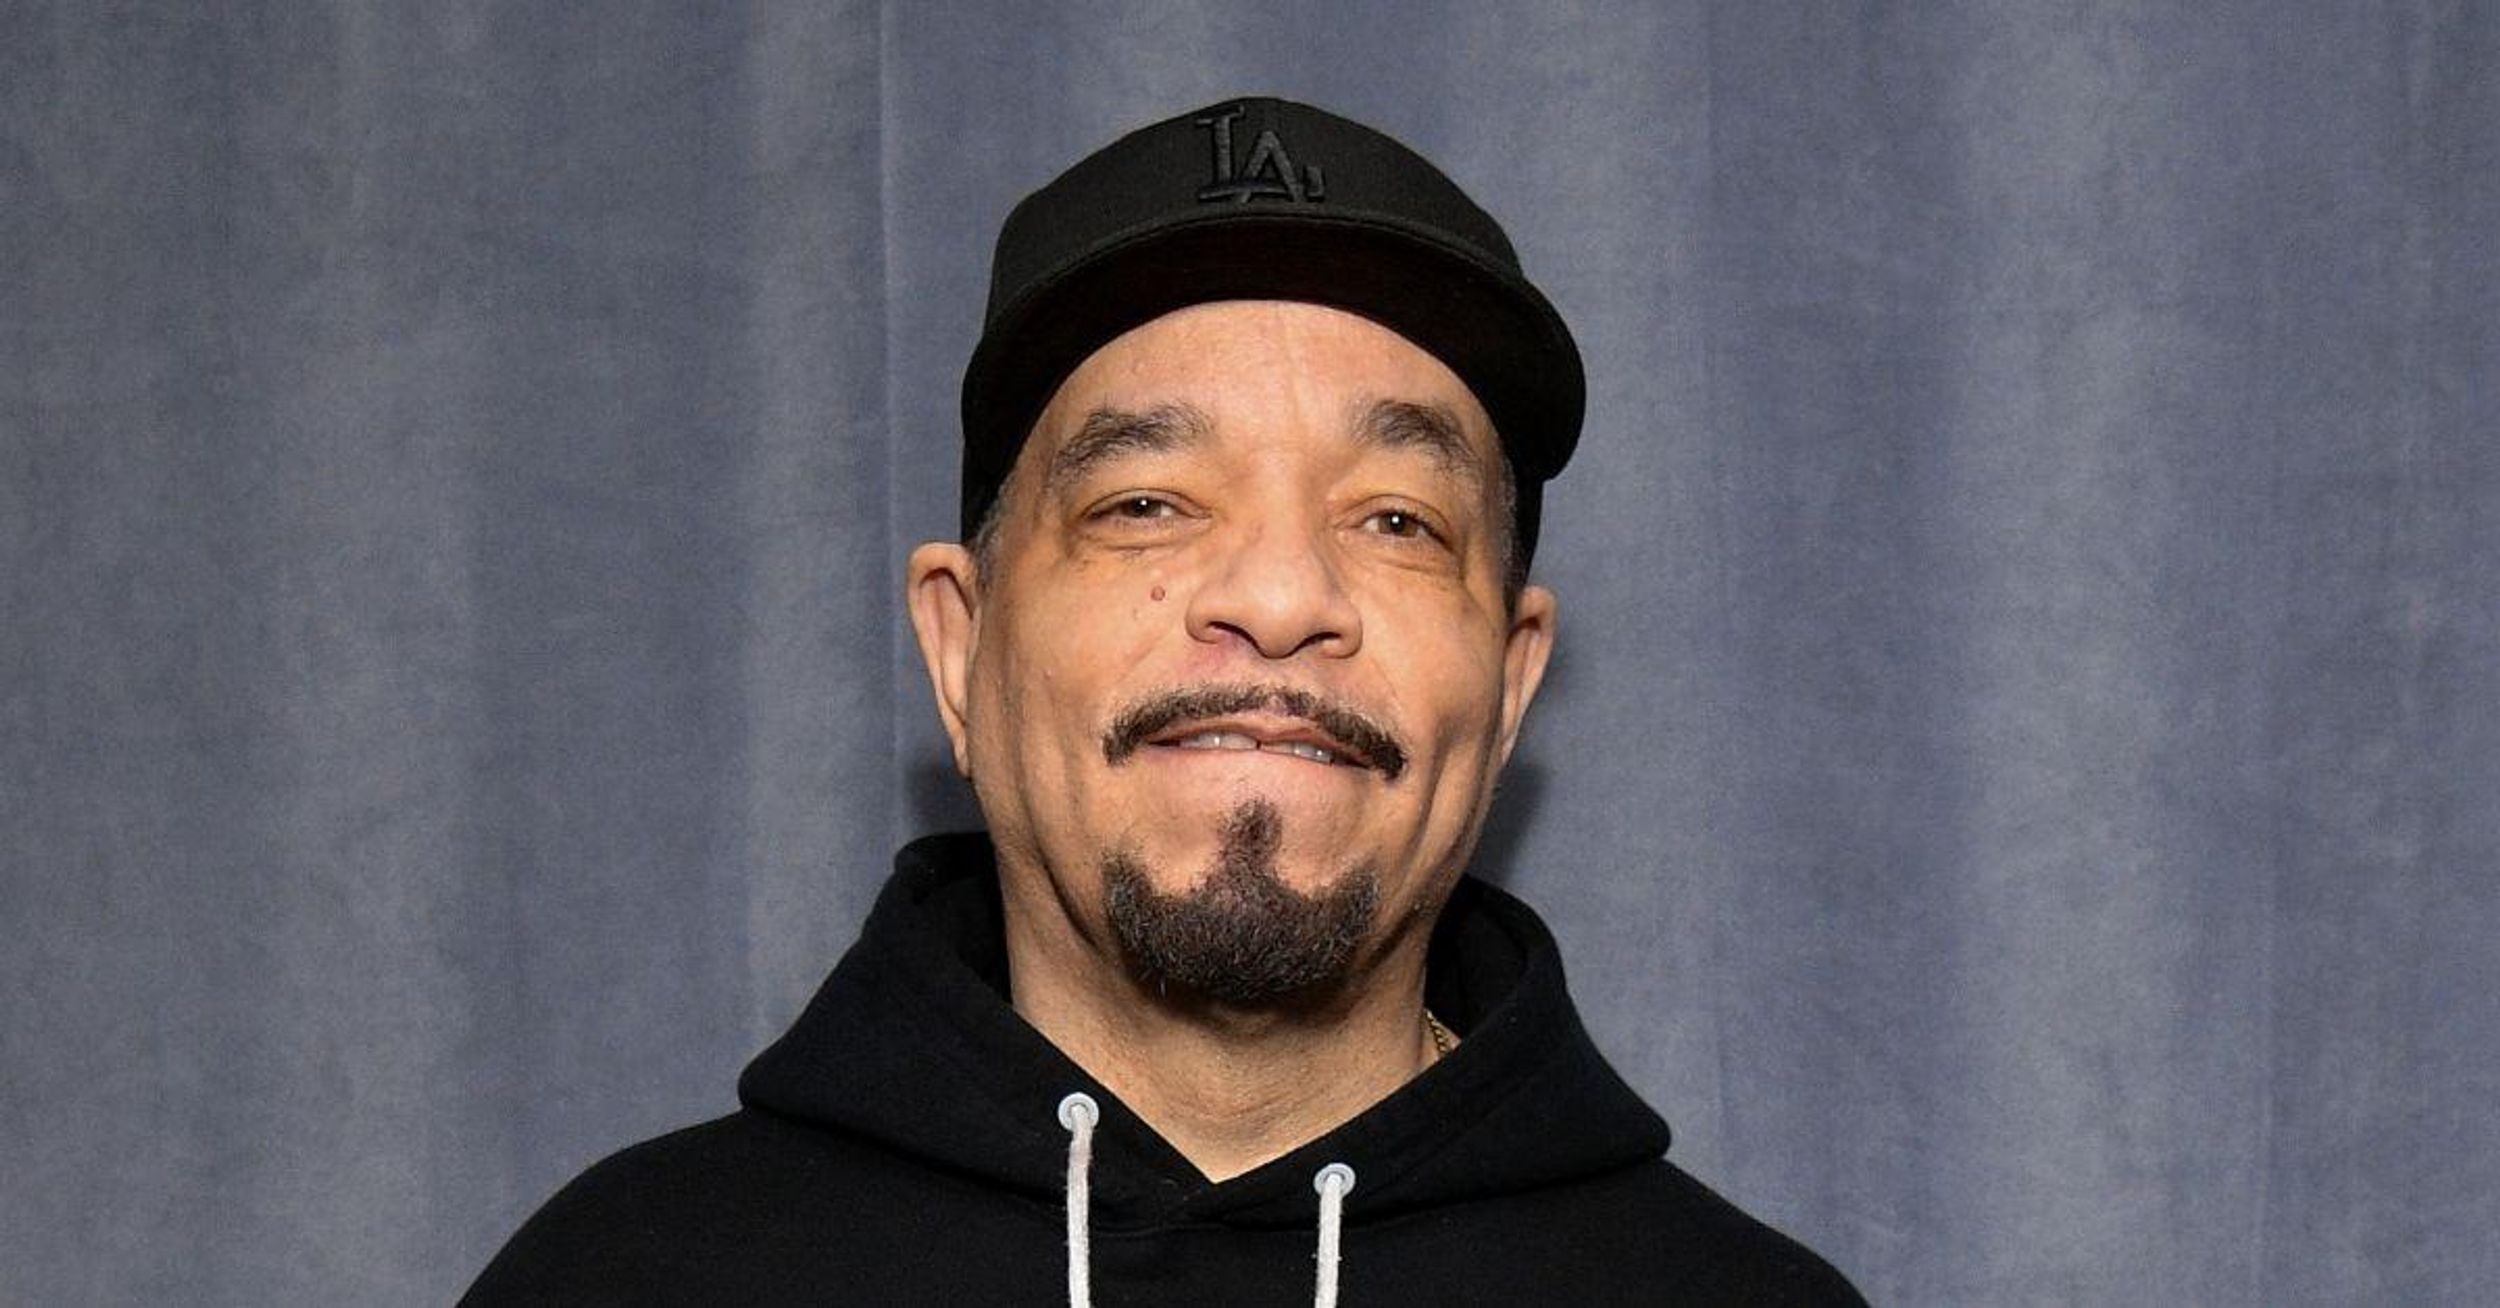 Ice-T's Dad Joke Tweet About Getting 'Robbed' At A Gas Station Has Twitter Rolling Their Eyes